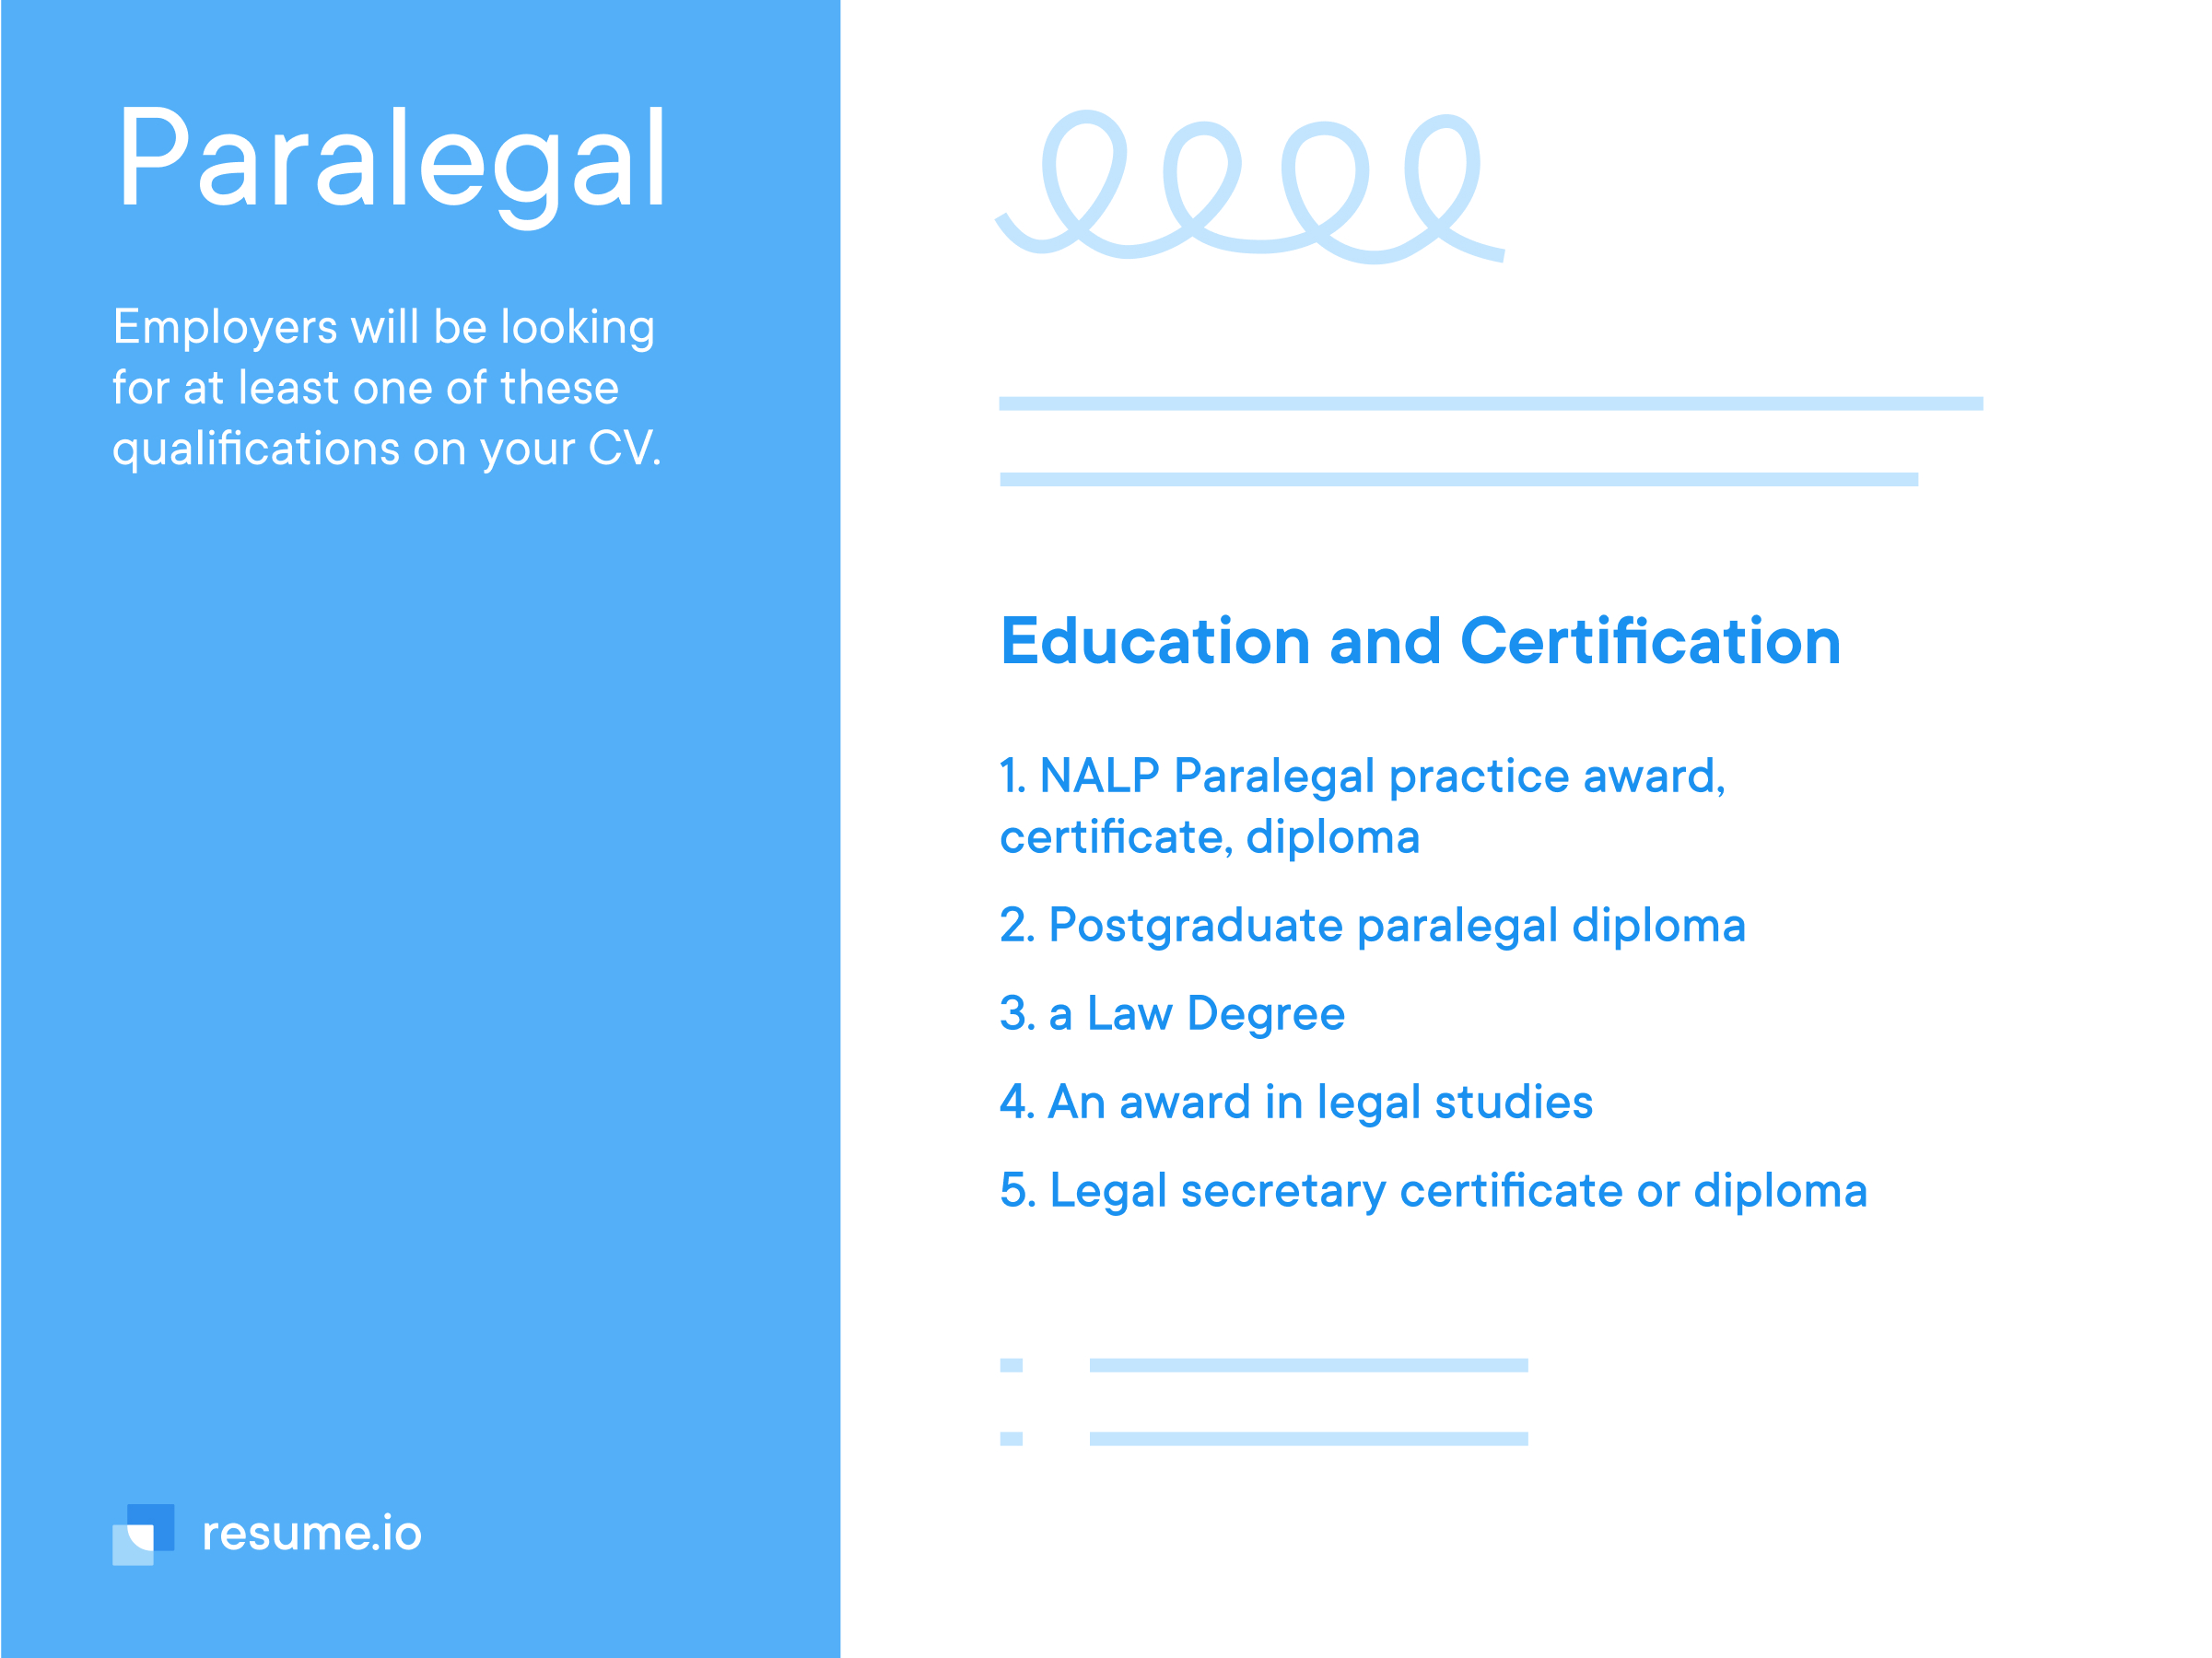 Blue text with qualifications that employers are looking for in a paralegal.